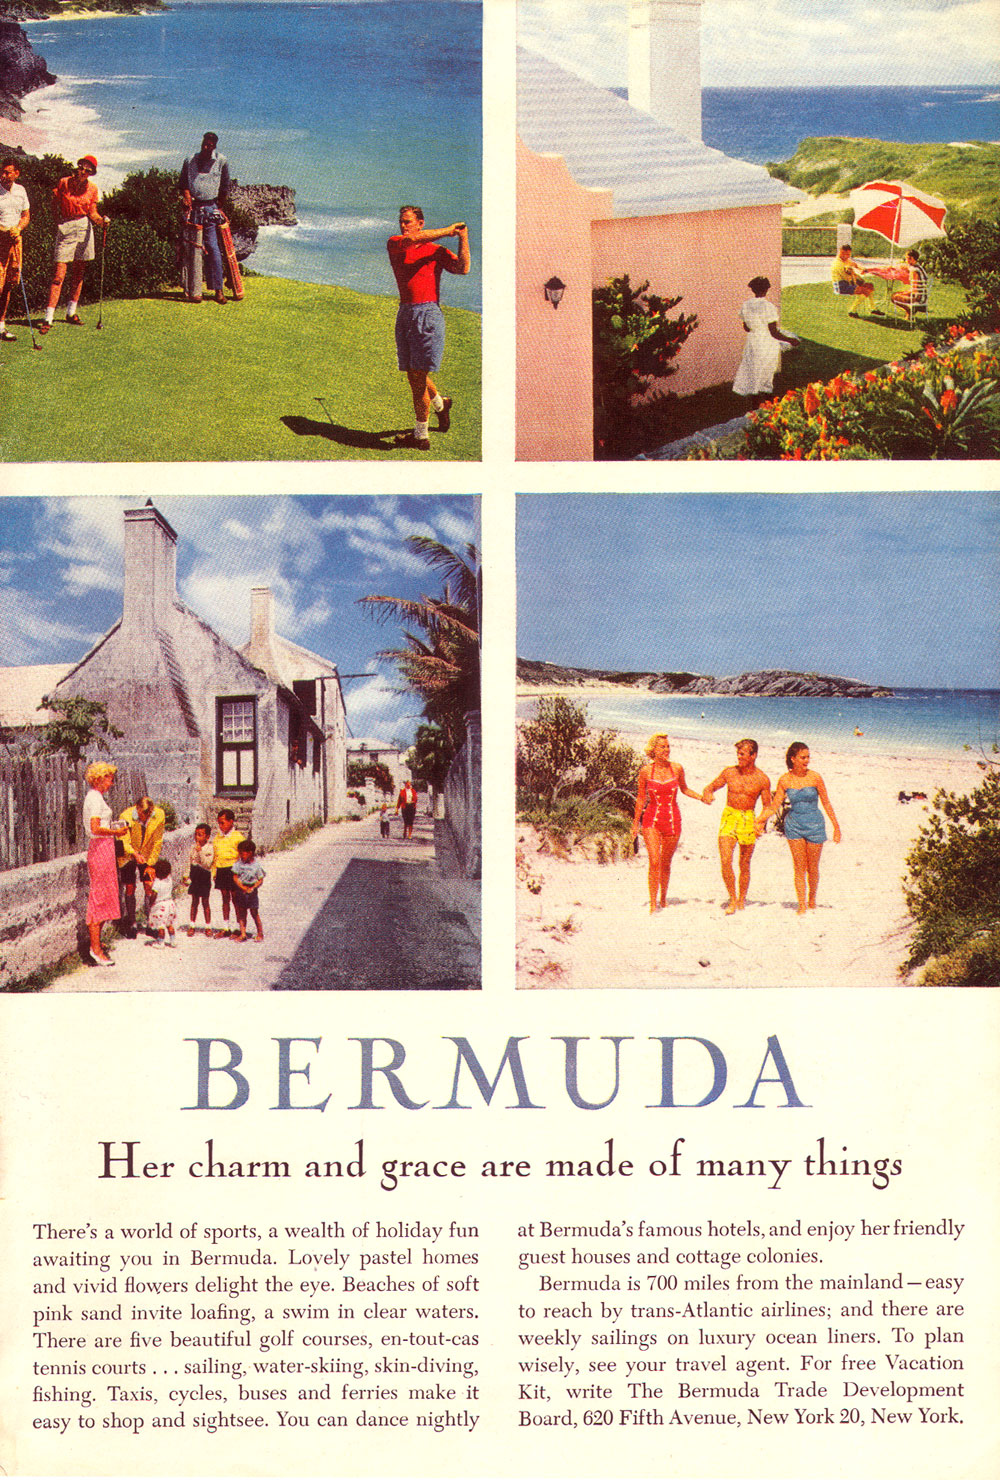 Bermuda - Her Grace and Charm are Made of Many Things